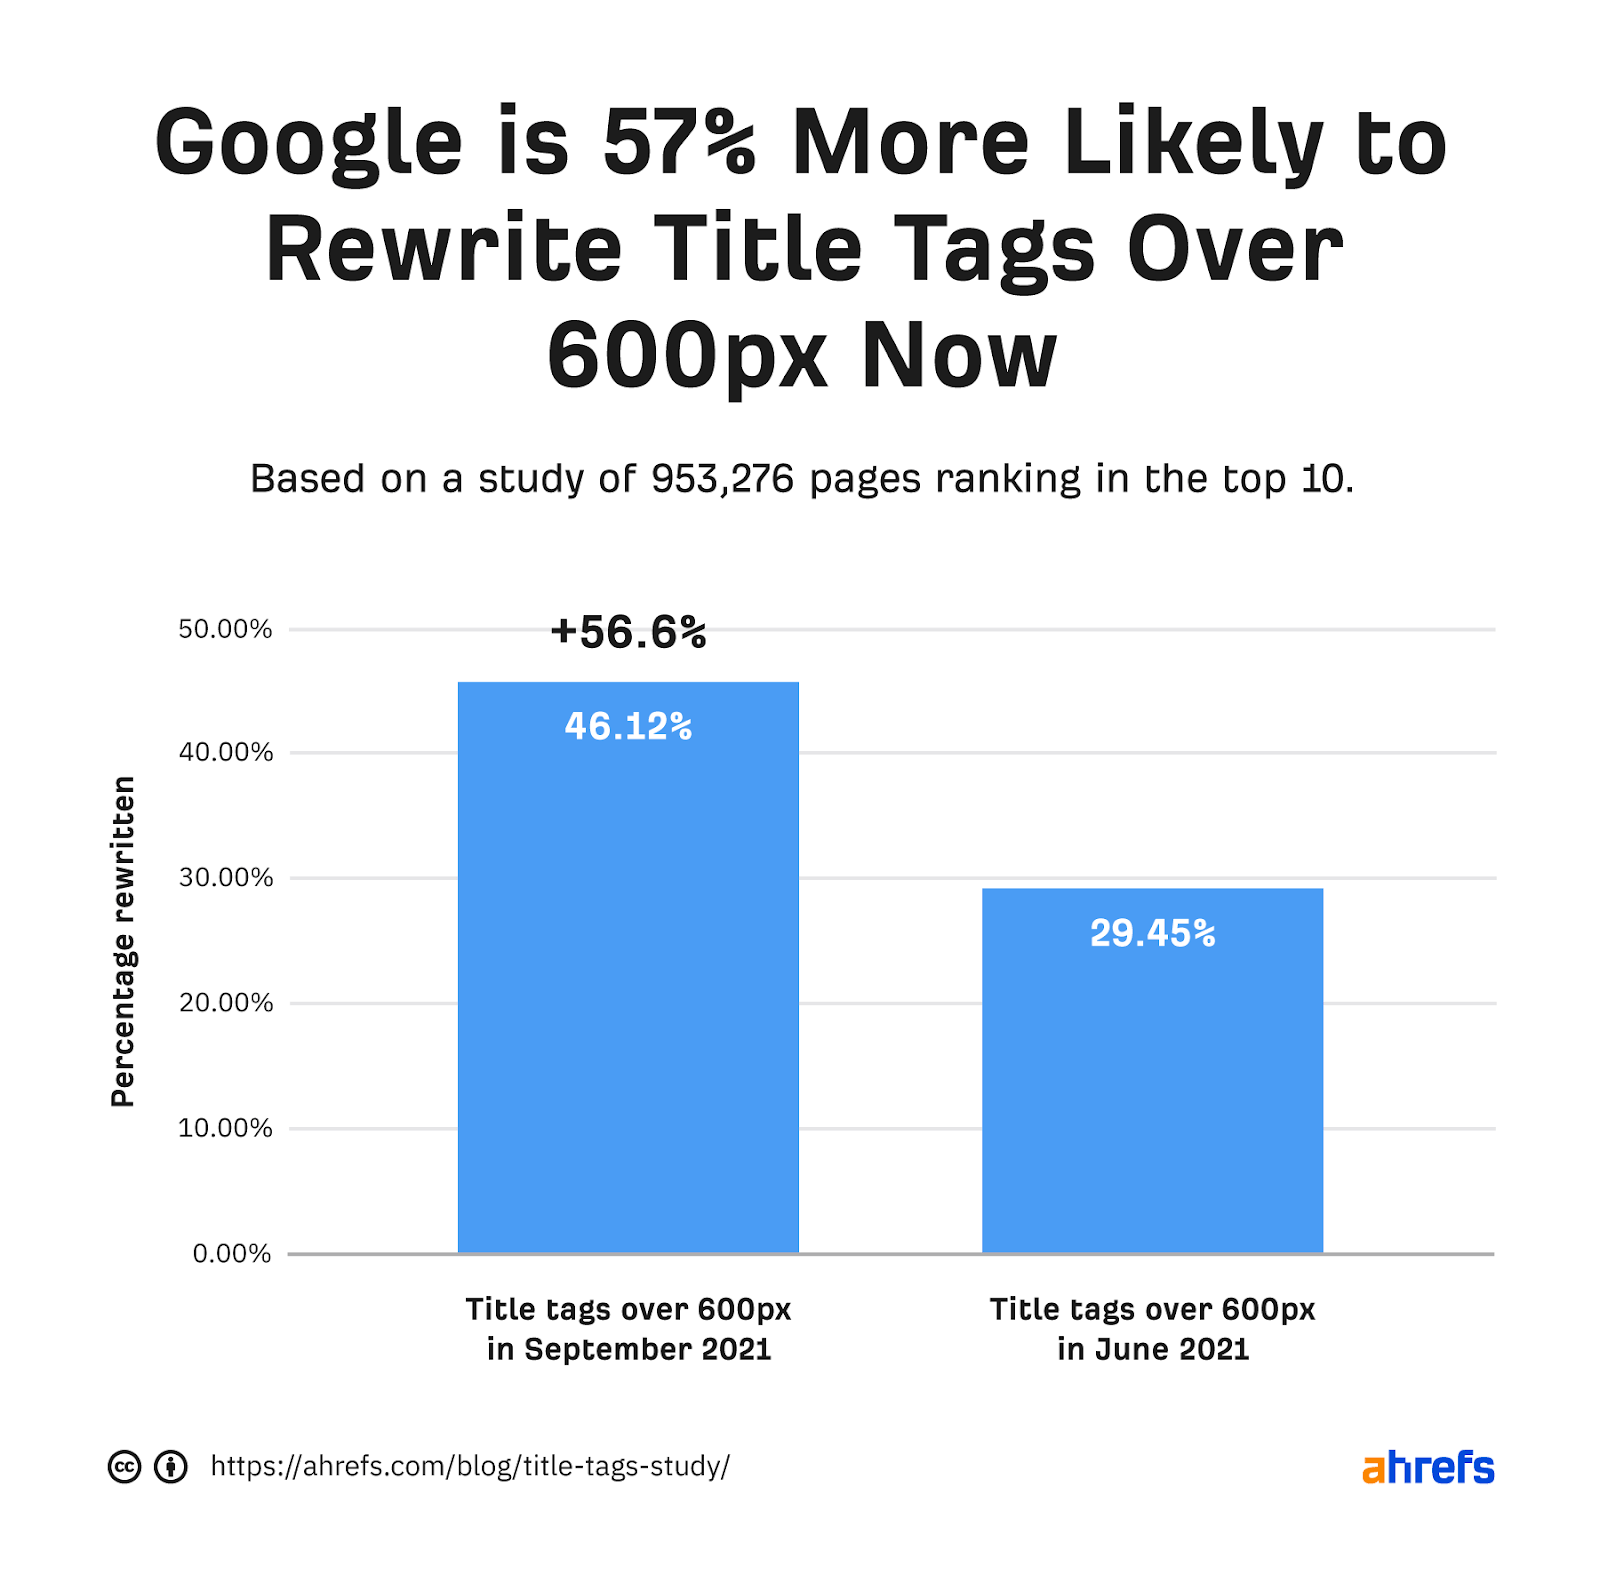 Google was more likely to rewrite title tags over 600 px in September 2021 than in June 2021